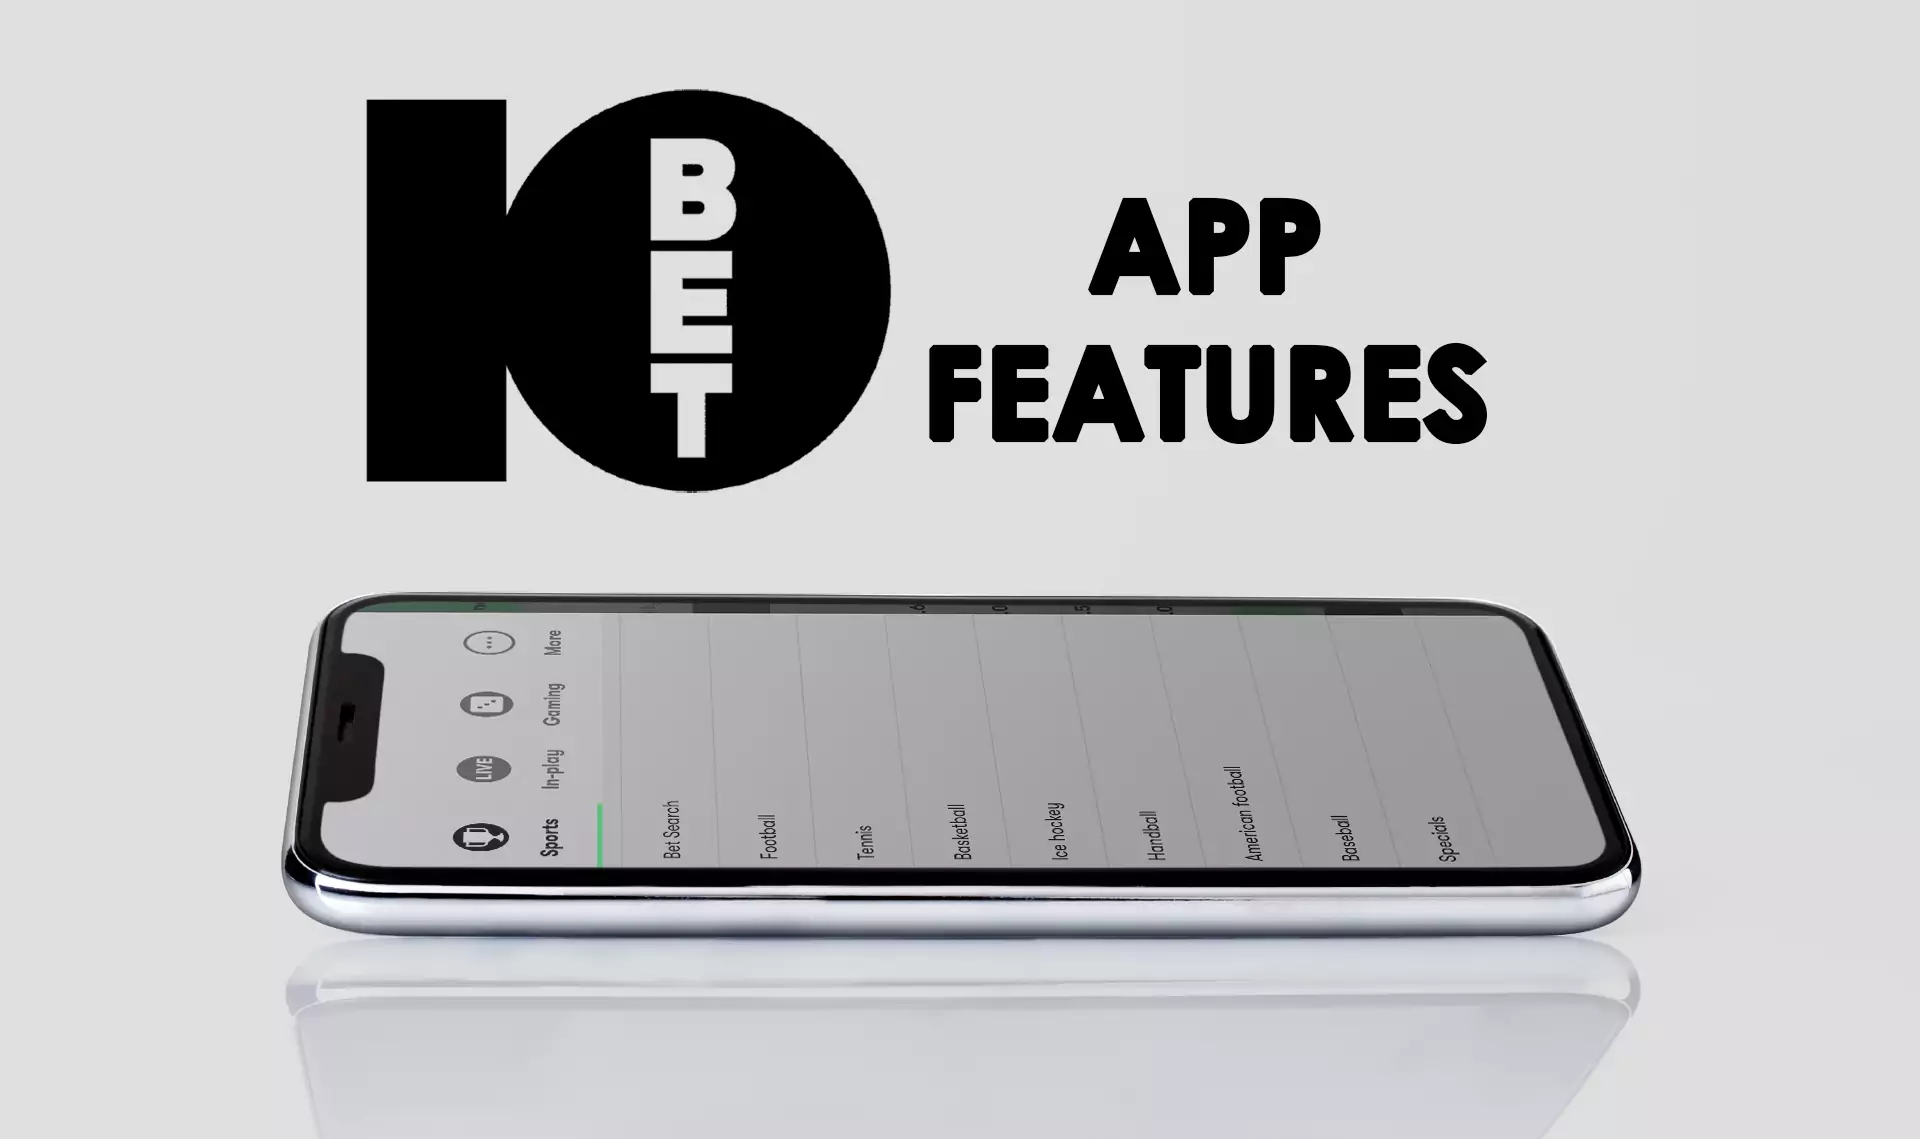 There is a number of important features that make the 10bet app more preferable than other apps for betting fans.